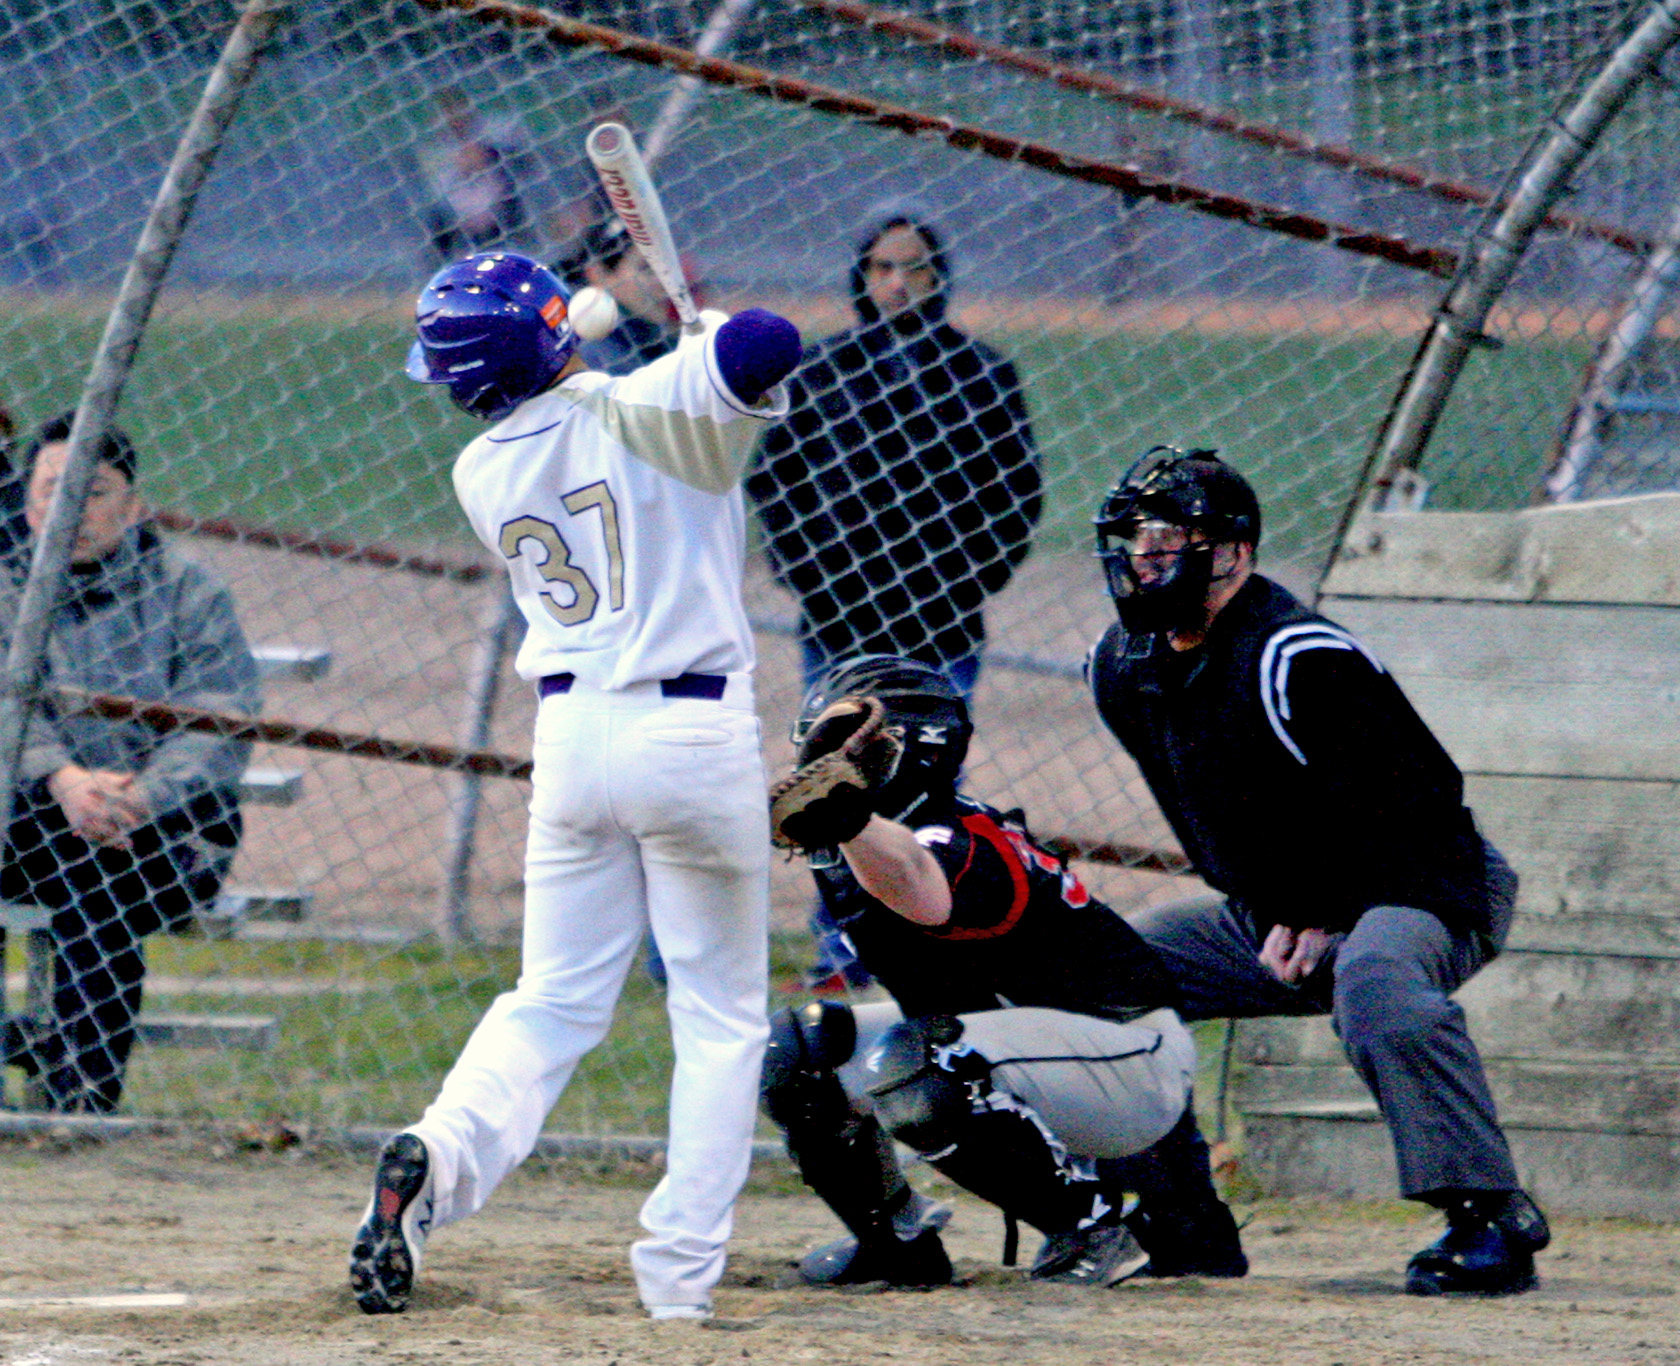 Joshua Enciso of Highline is hit by a pitch.